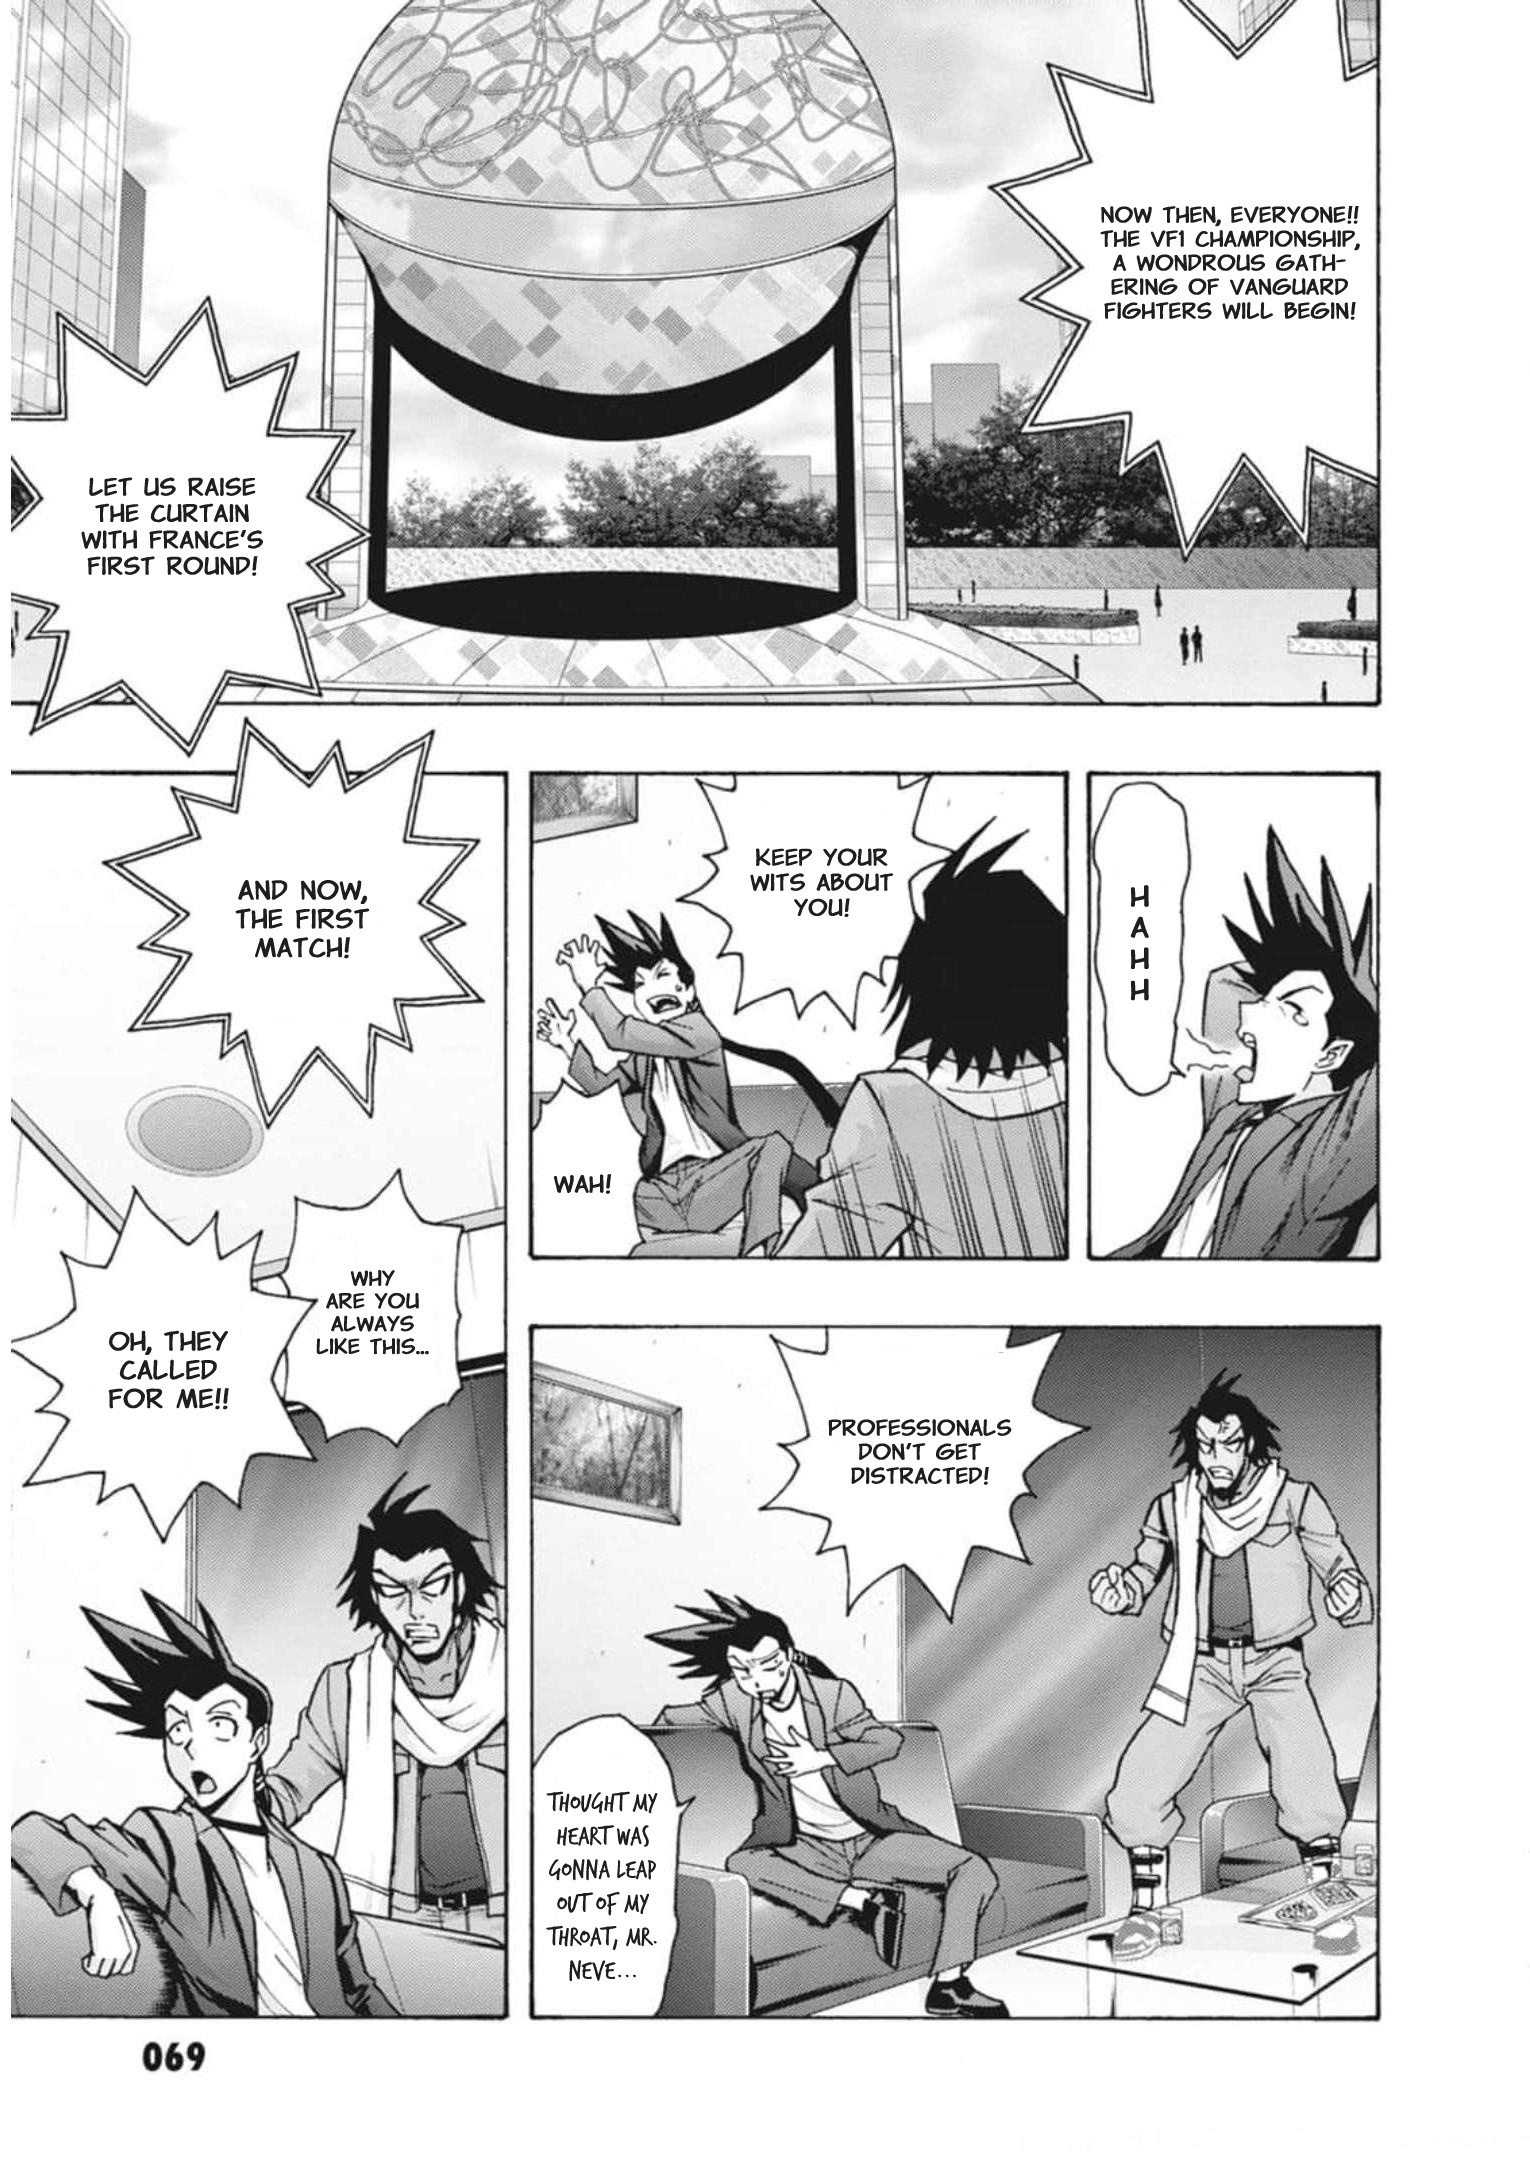 Cardfight!! Vanguard: Turnabout Chapter 11 #1